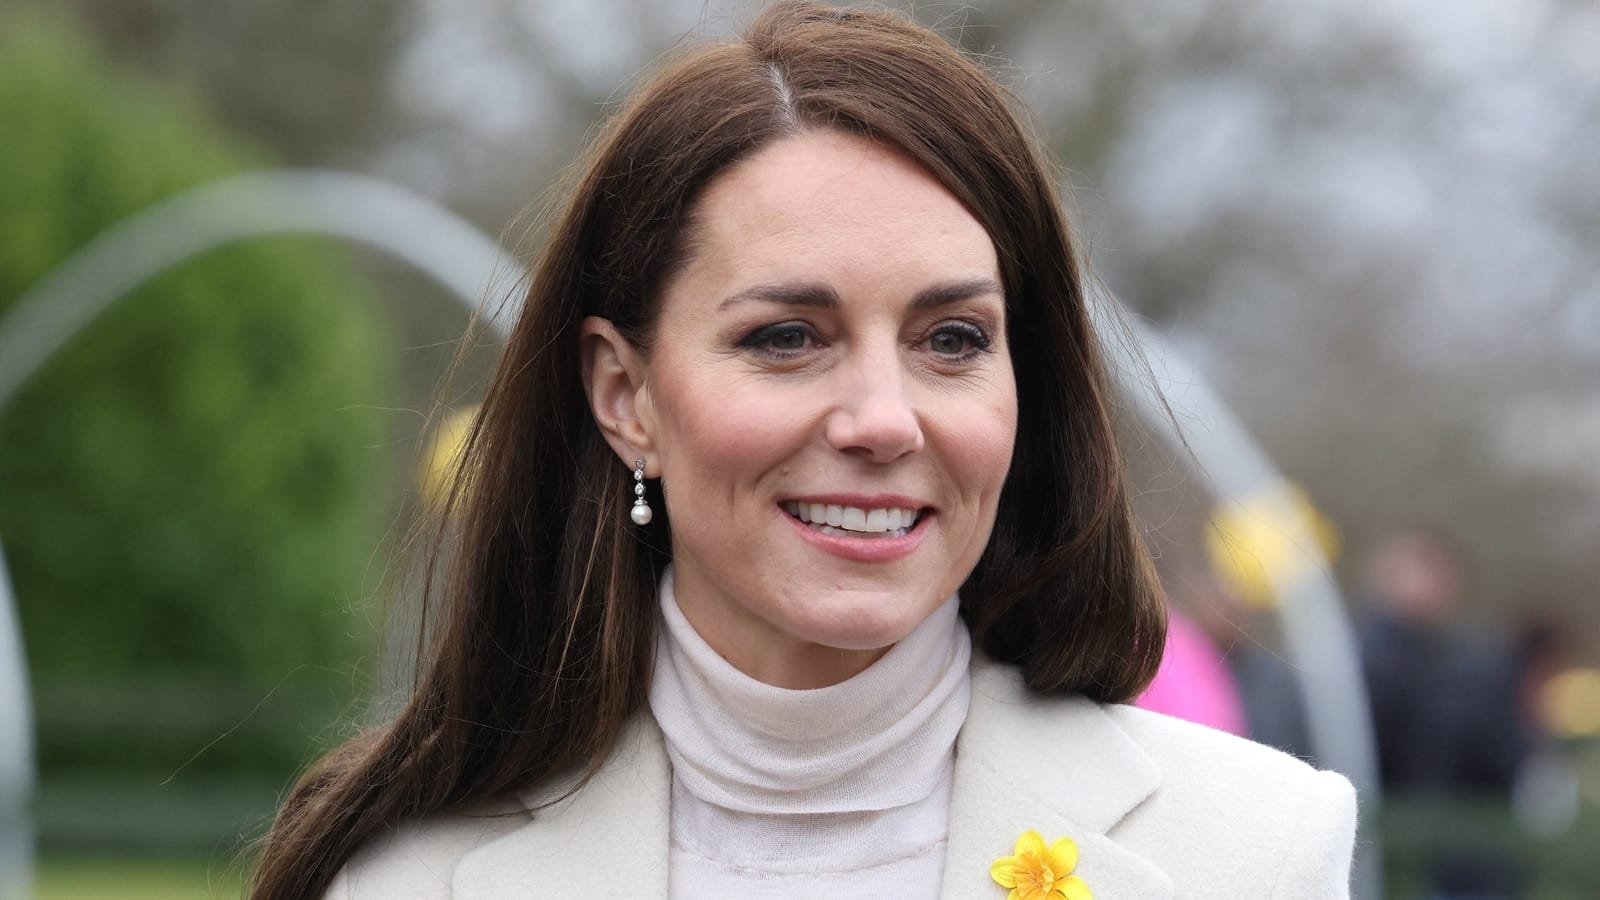 Kate Middleton disappearance conspiracy sparks crazy Internet theories